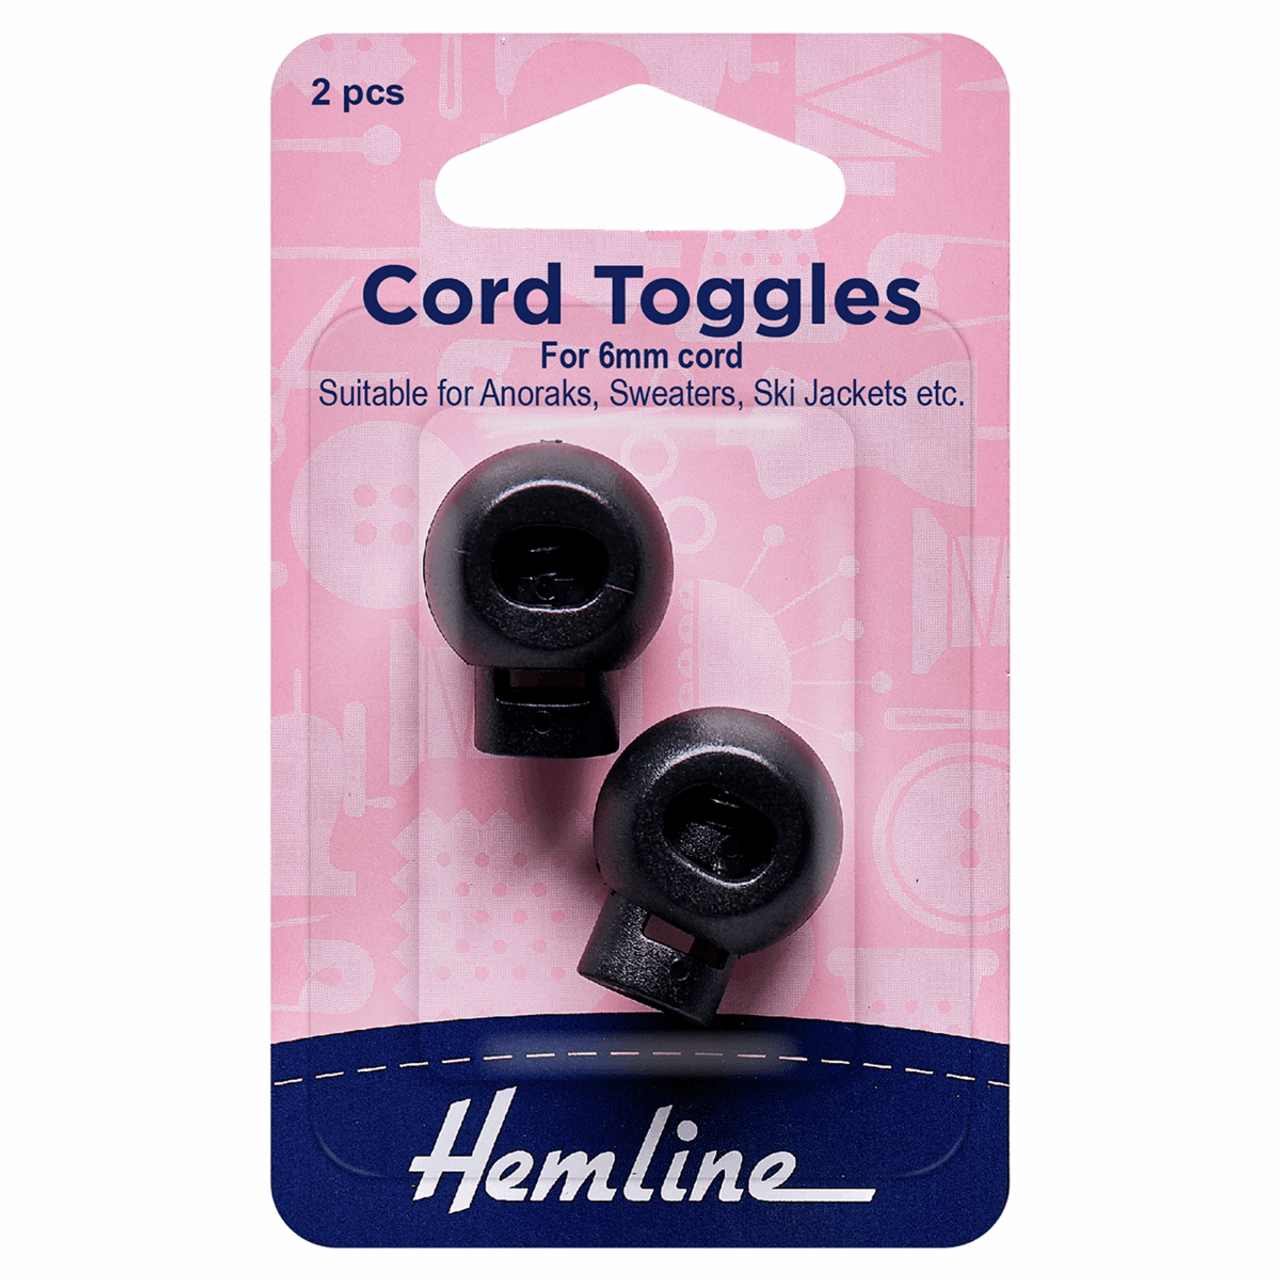 Pack of 2 Cord Toggles